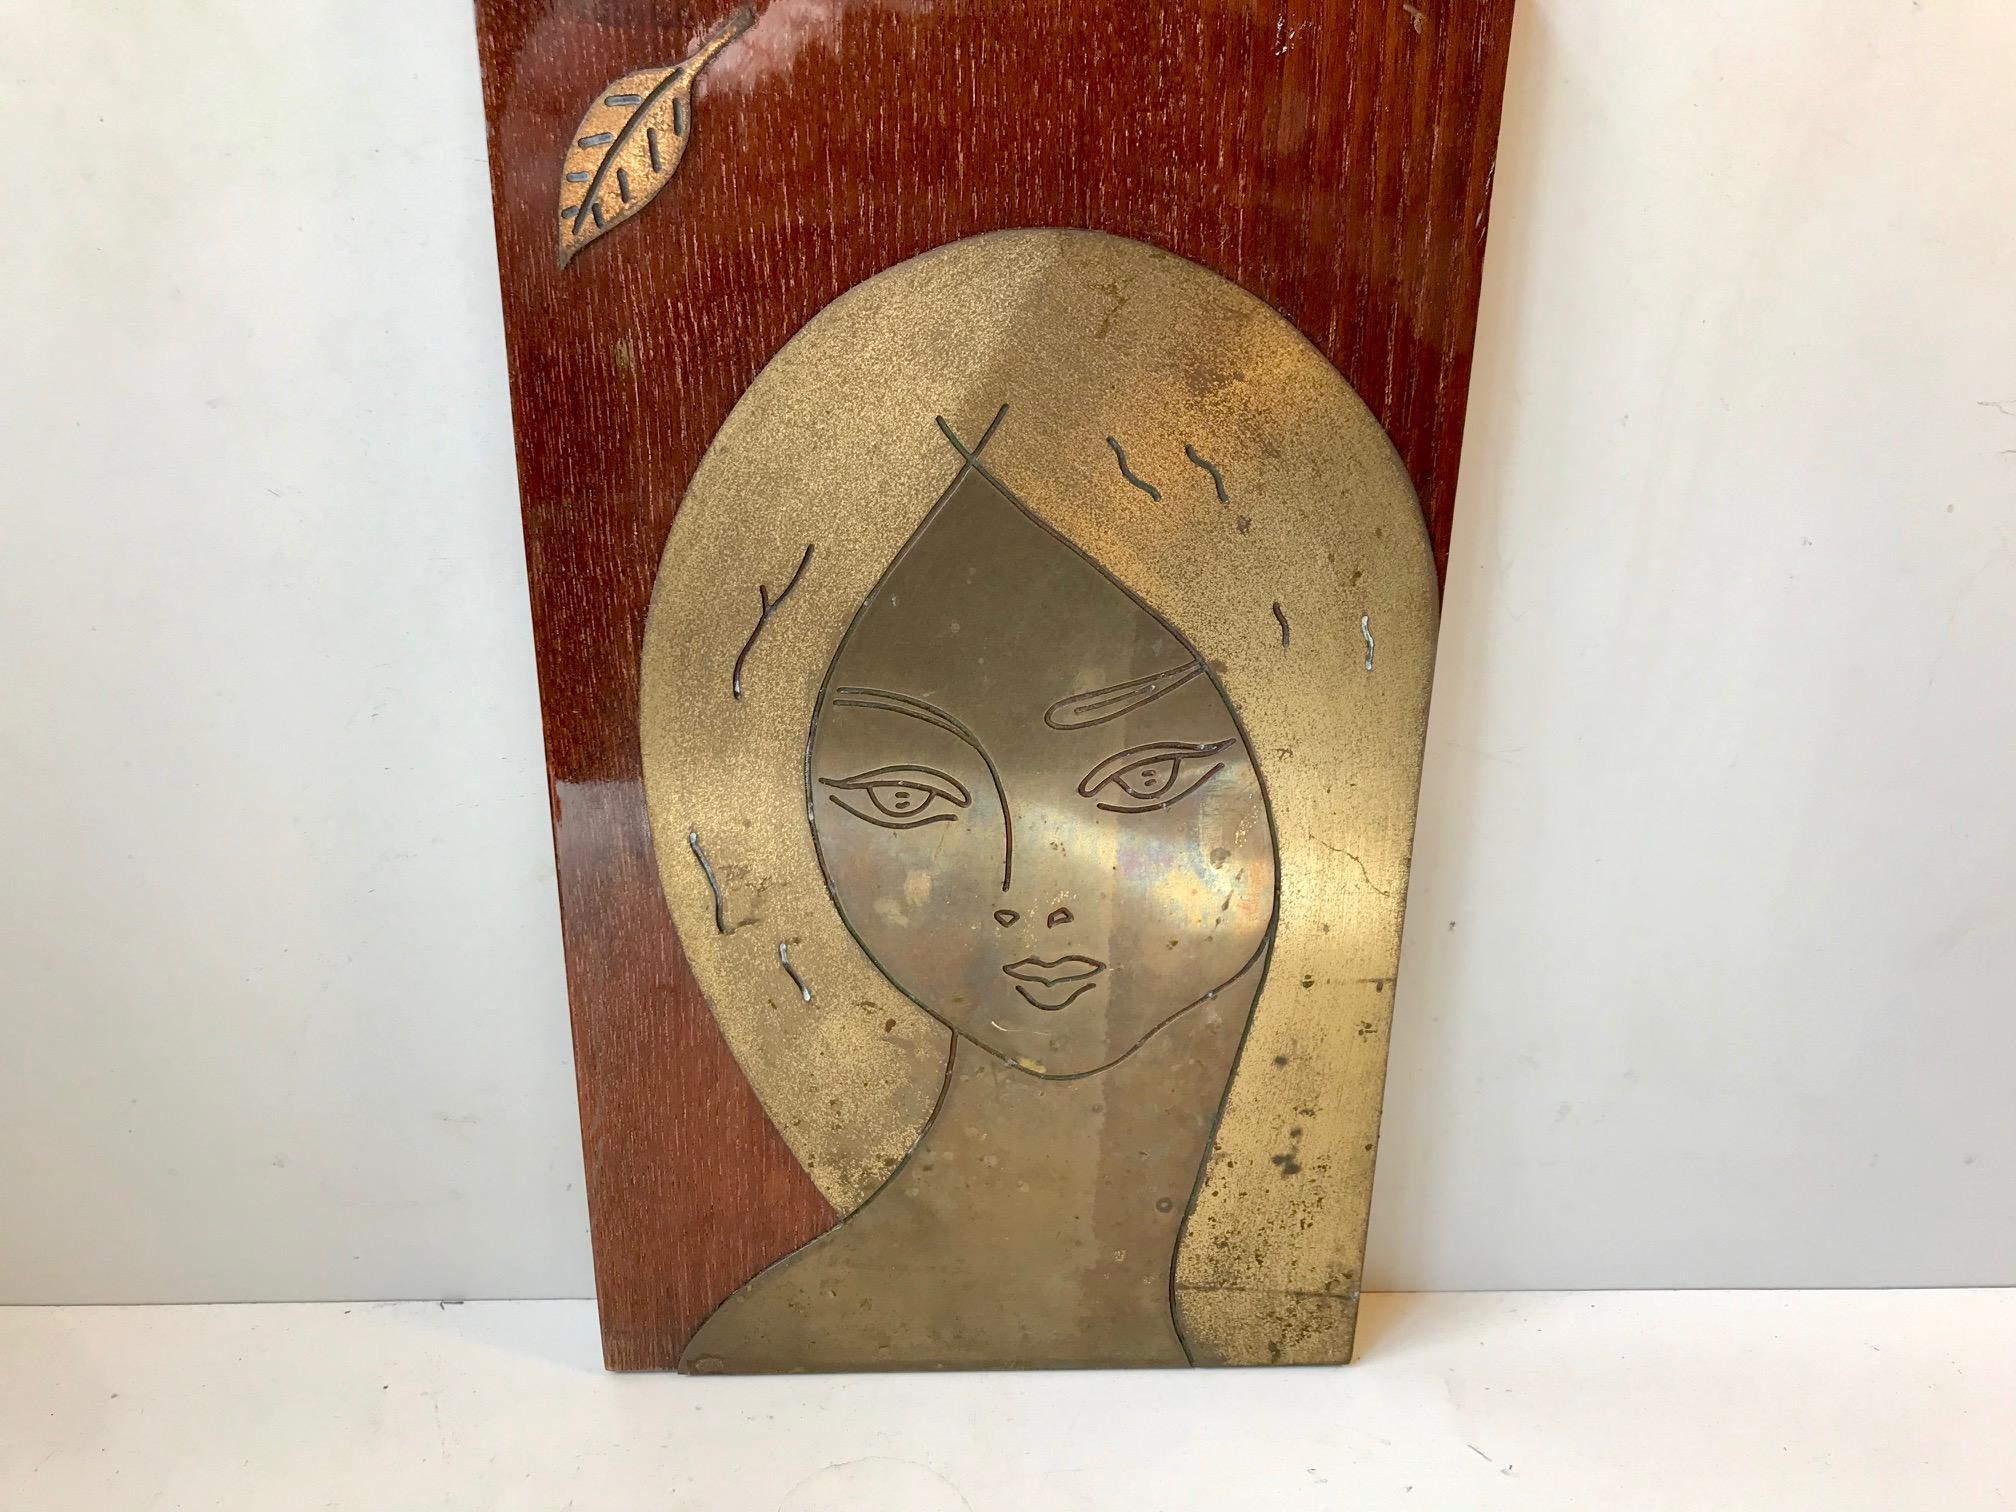 This may be a take on Postmodern iconography. Saint Philomena anno 1960? Nevertheless this unique hand crafted brass wall plaque incapsulates the characteristics of the 1950s and 1960s pin-up culture while maintaining a certain purity. The old fated